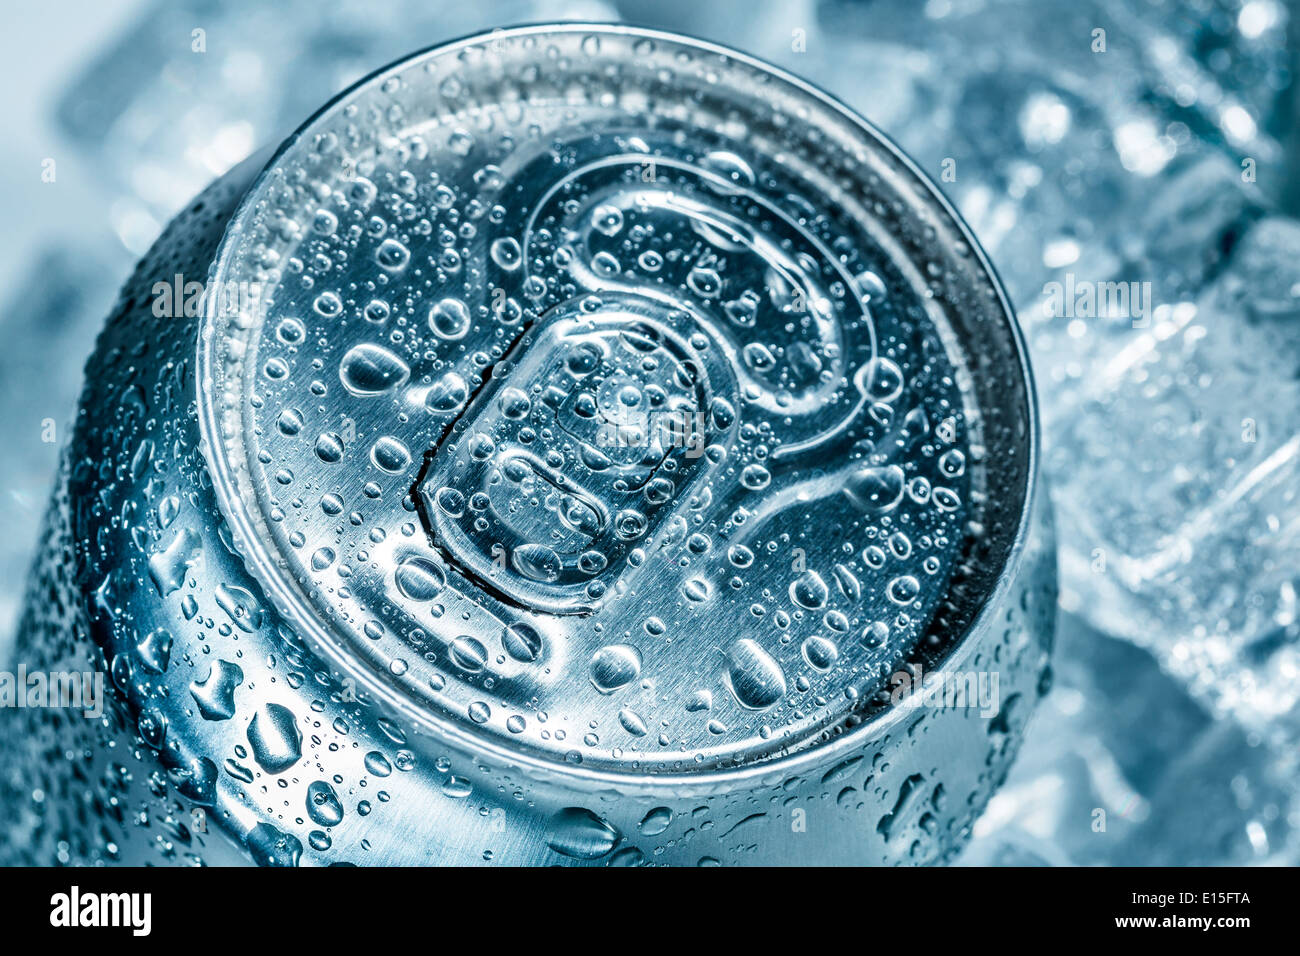 Can of soft drink on ice. Stock Photo